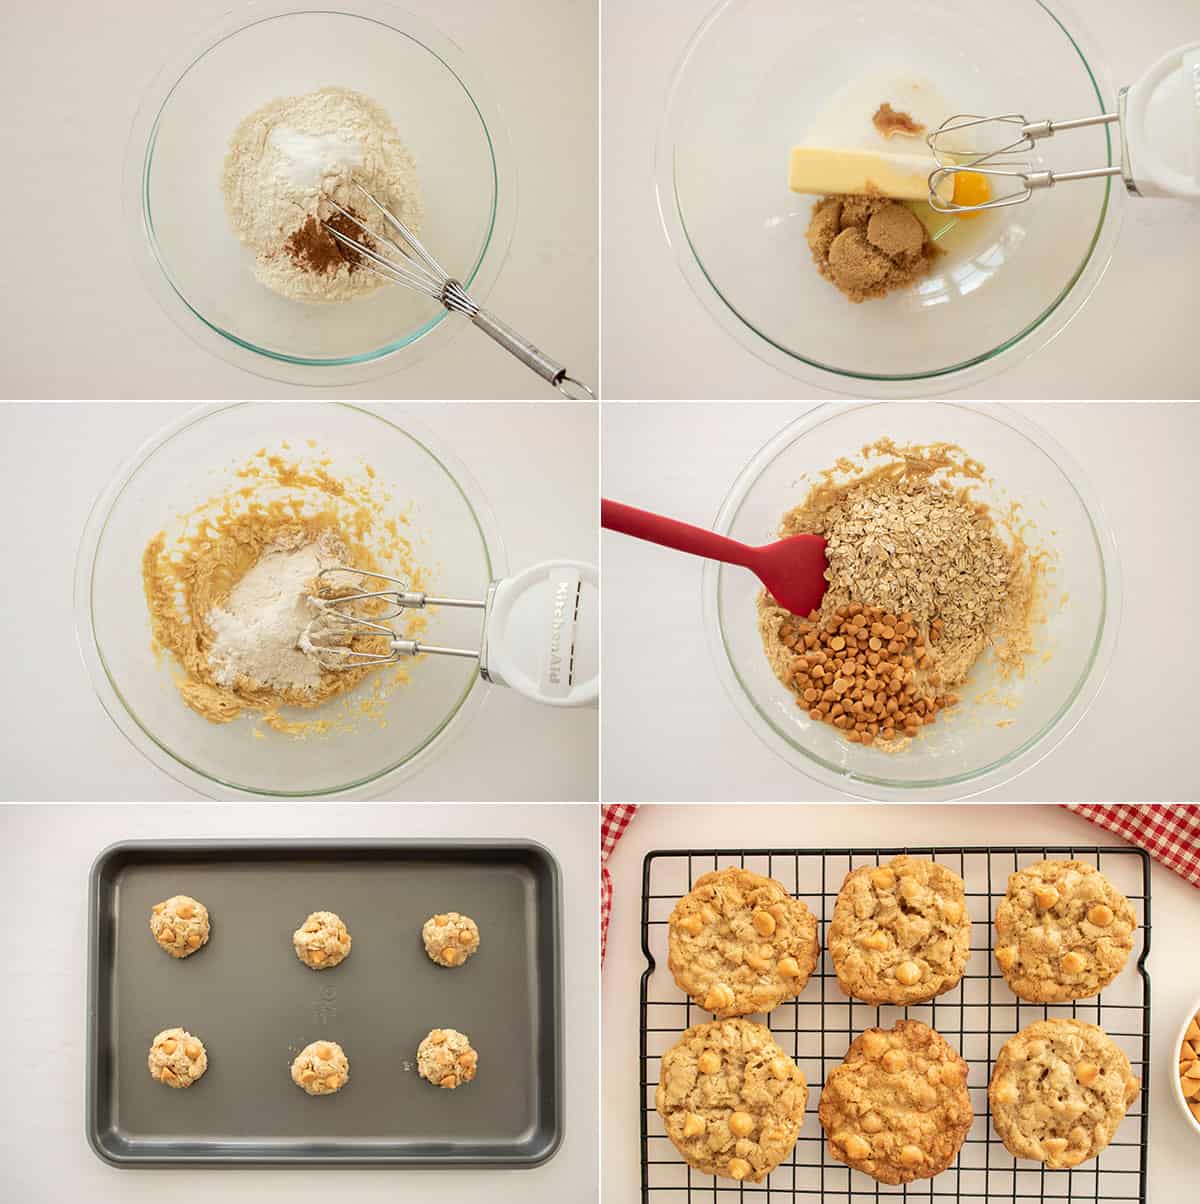 Steps to make Oatmeal Cookies with Butterscotch Chips